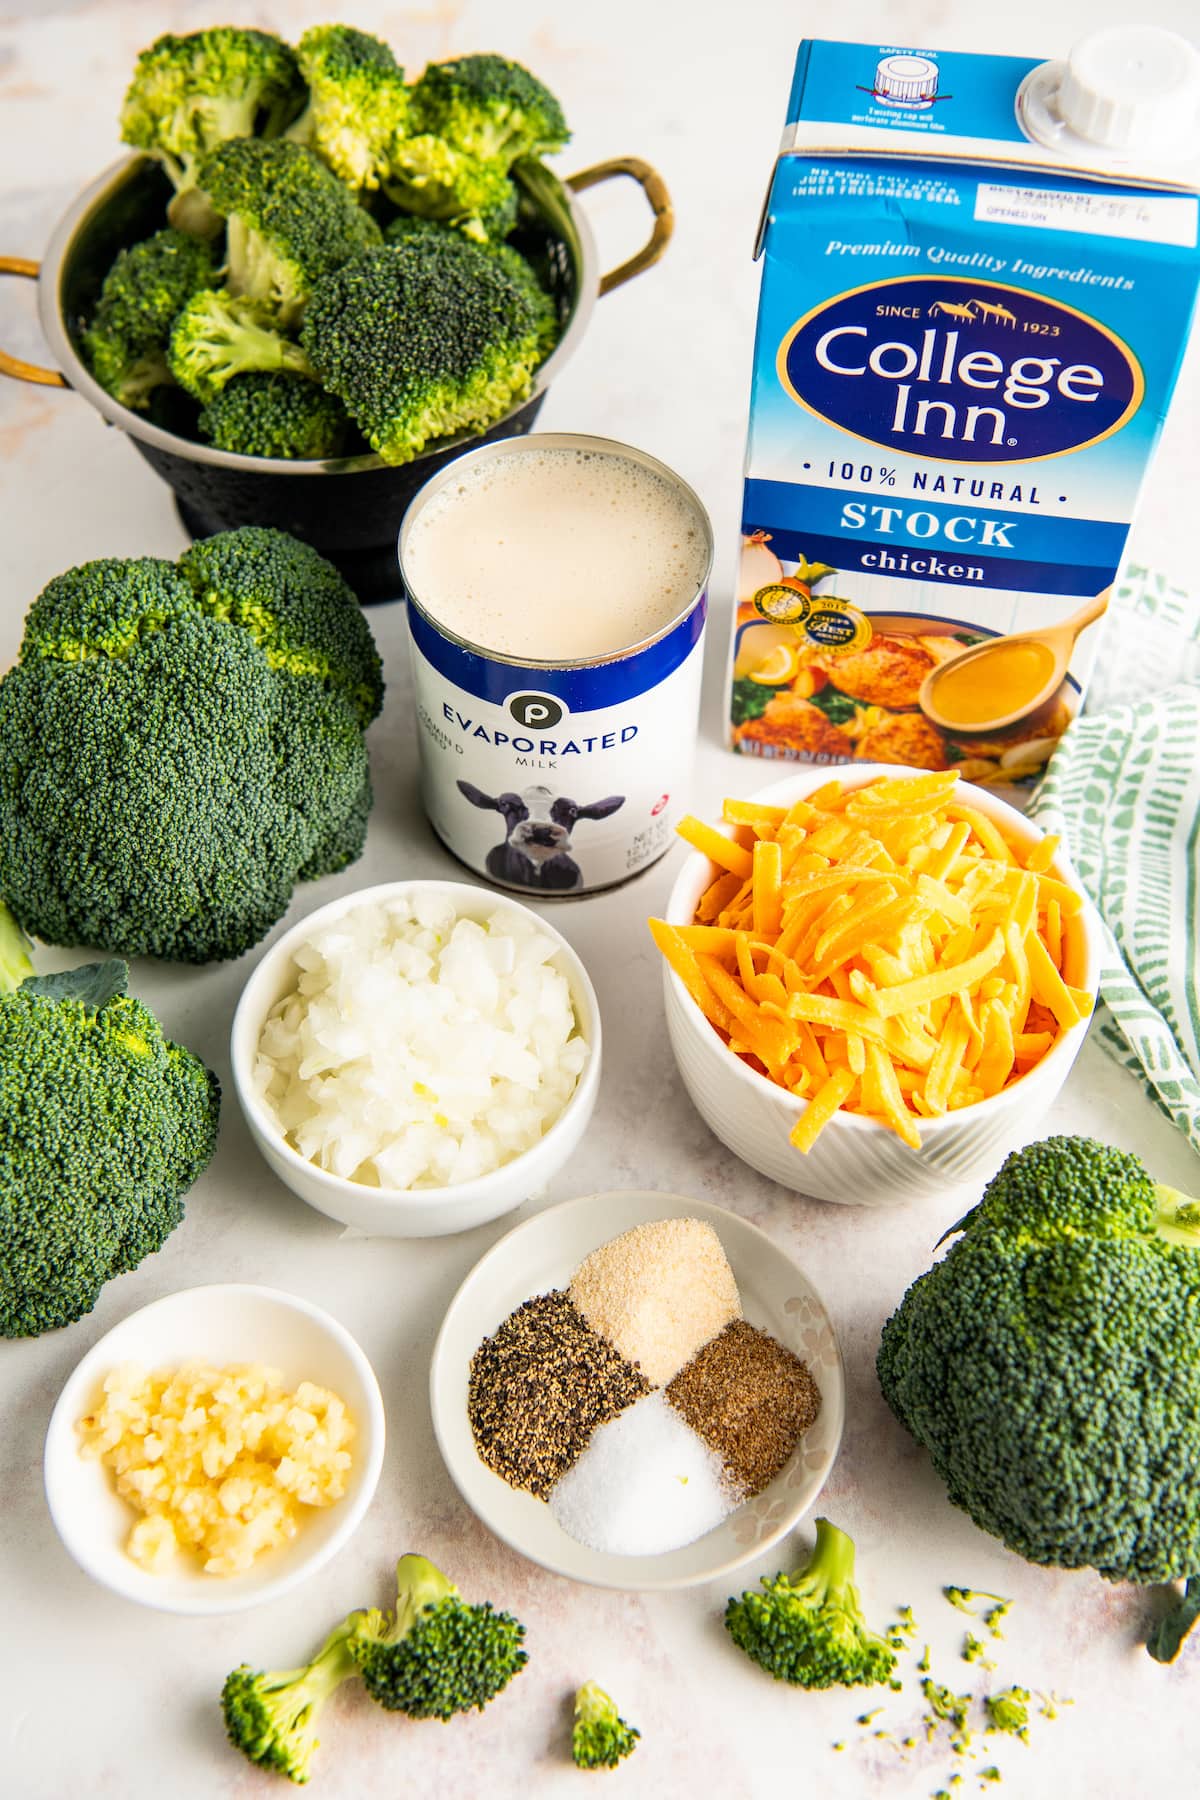 Ingredients for broccoli cheese soup, arranged on a table.